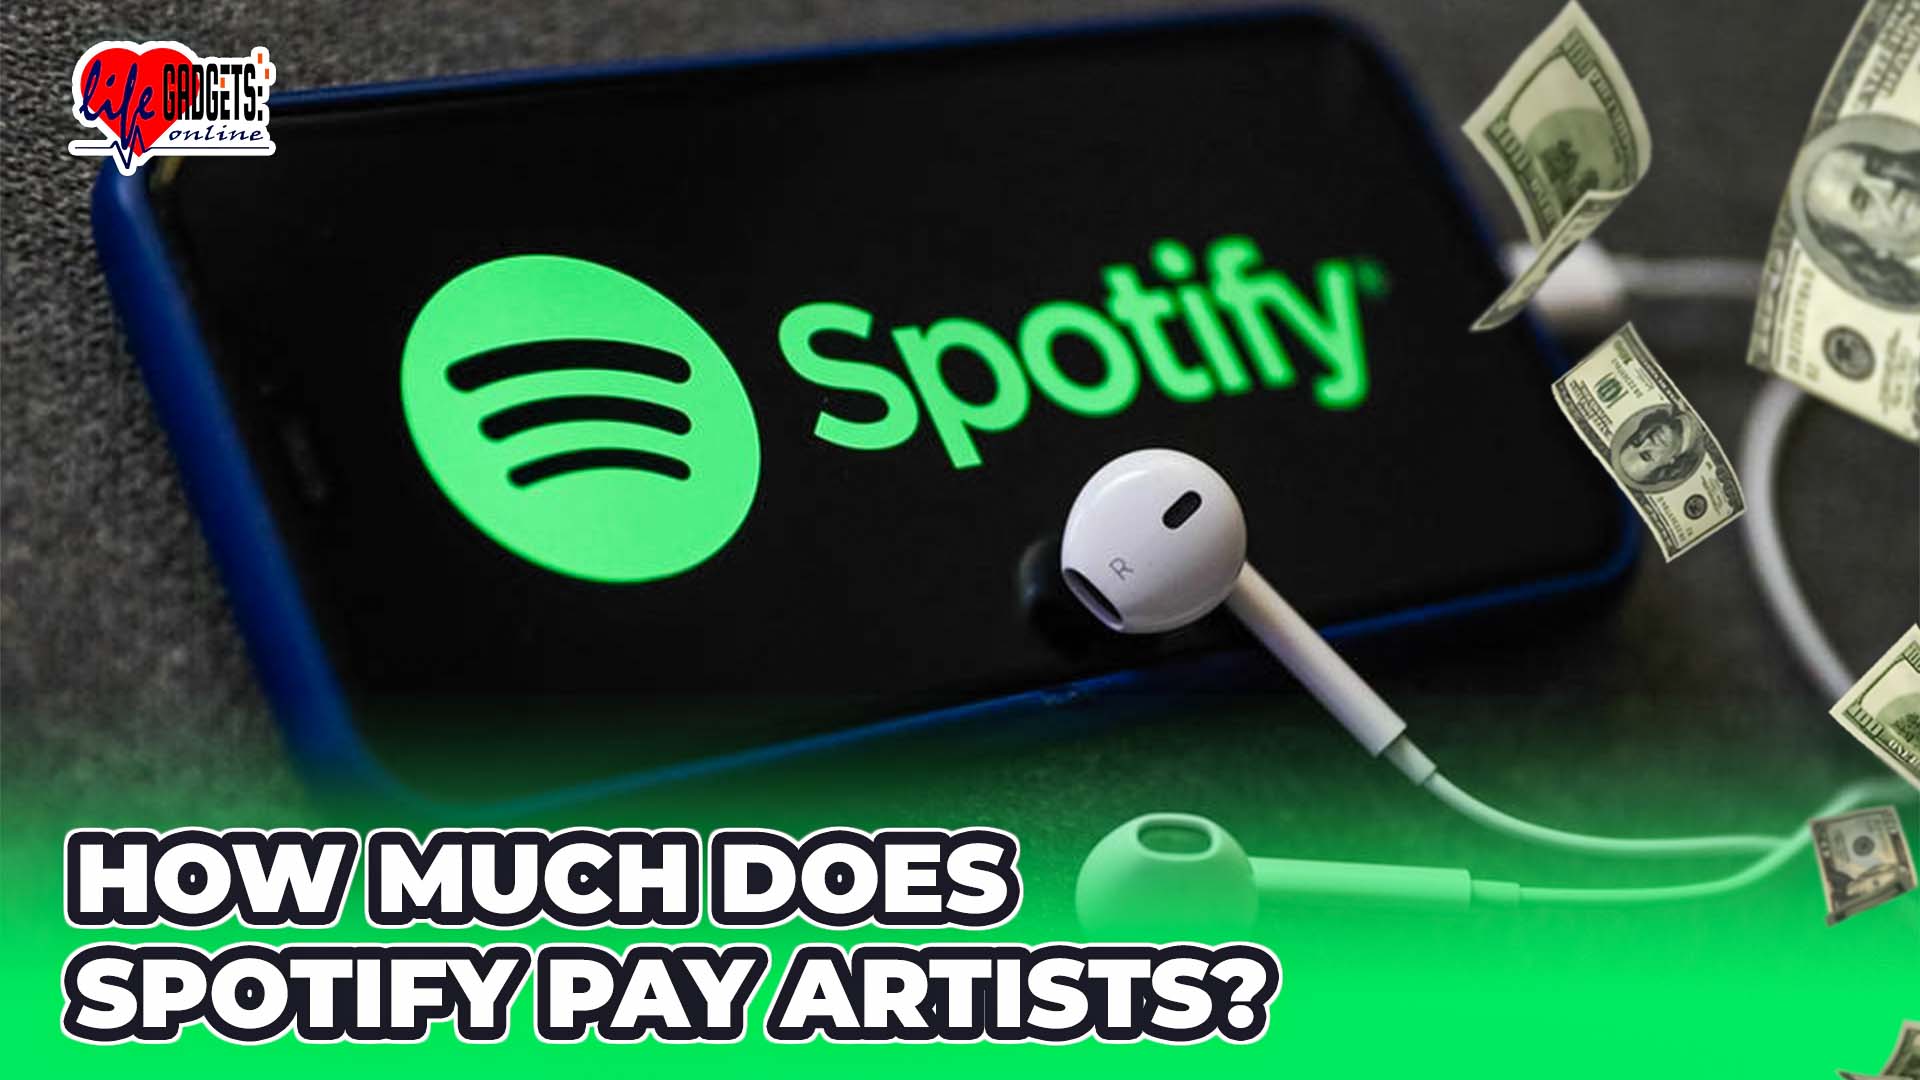 How Much Does Spotify Pay Artists?